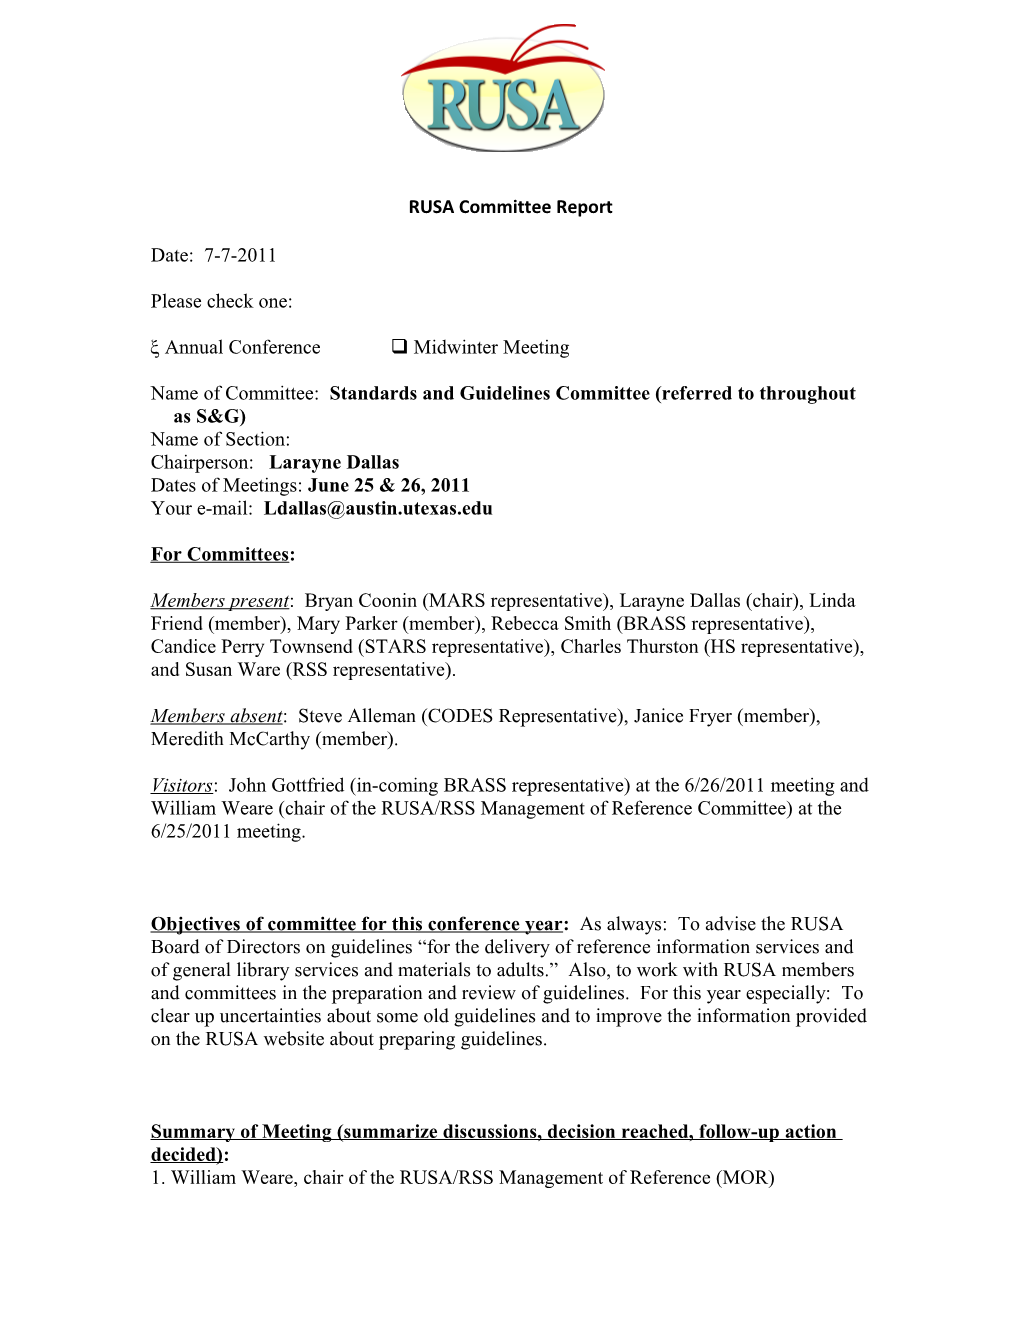 RUSA Committee Report Template